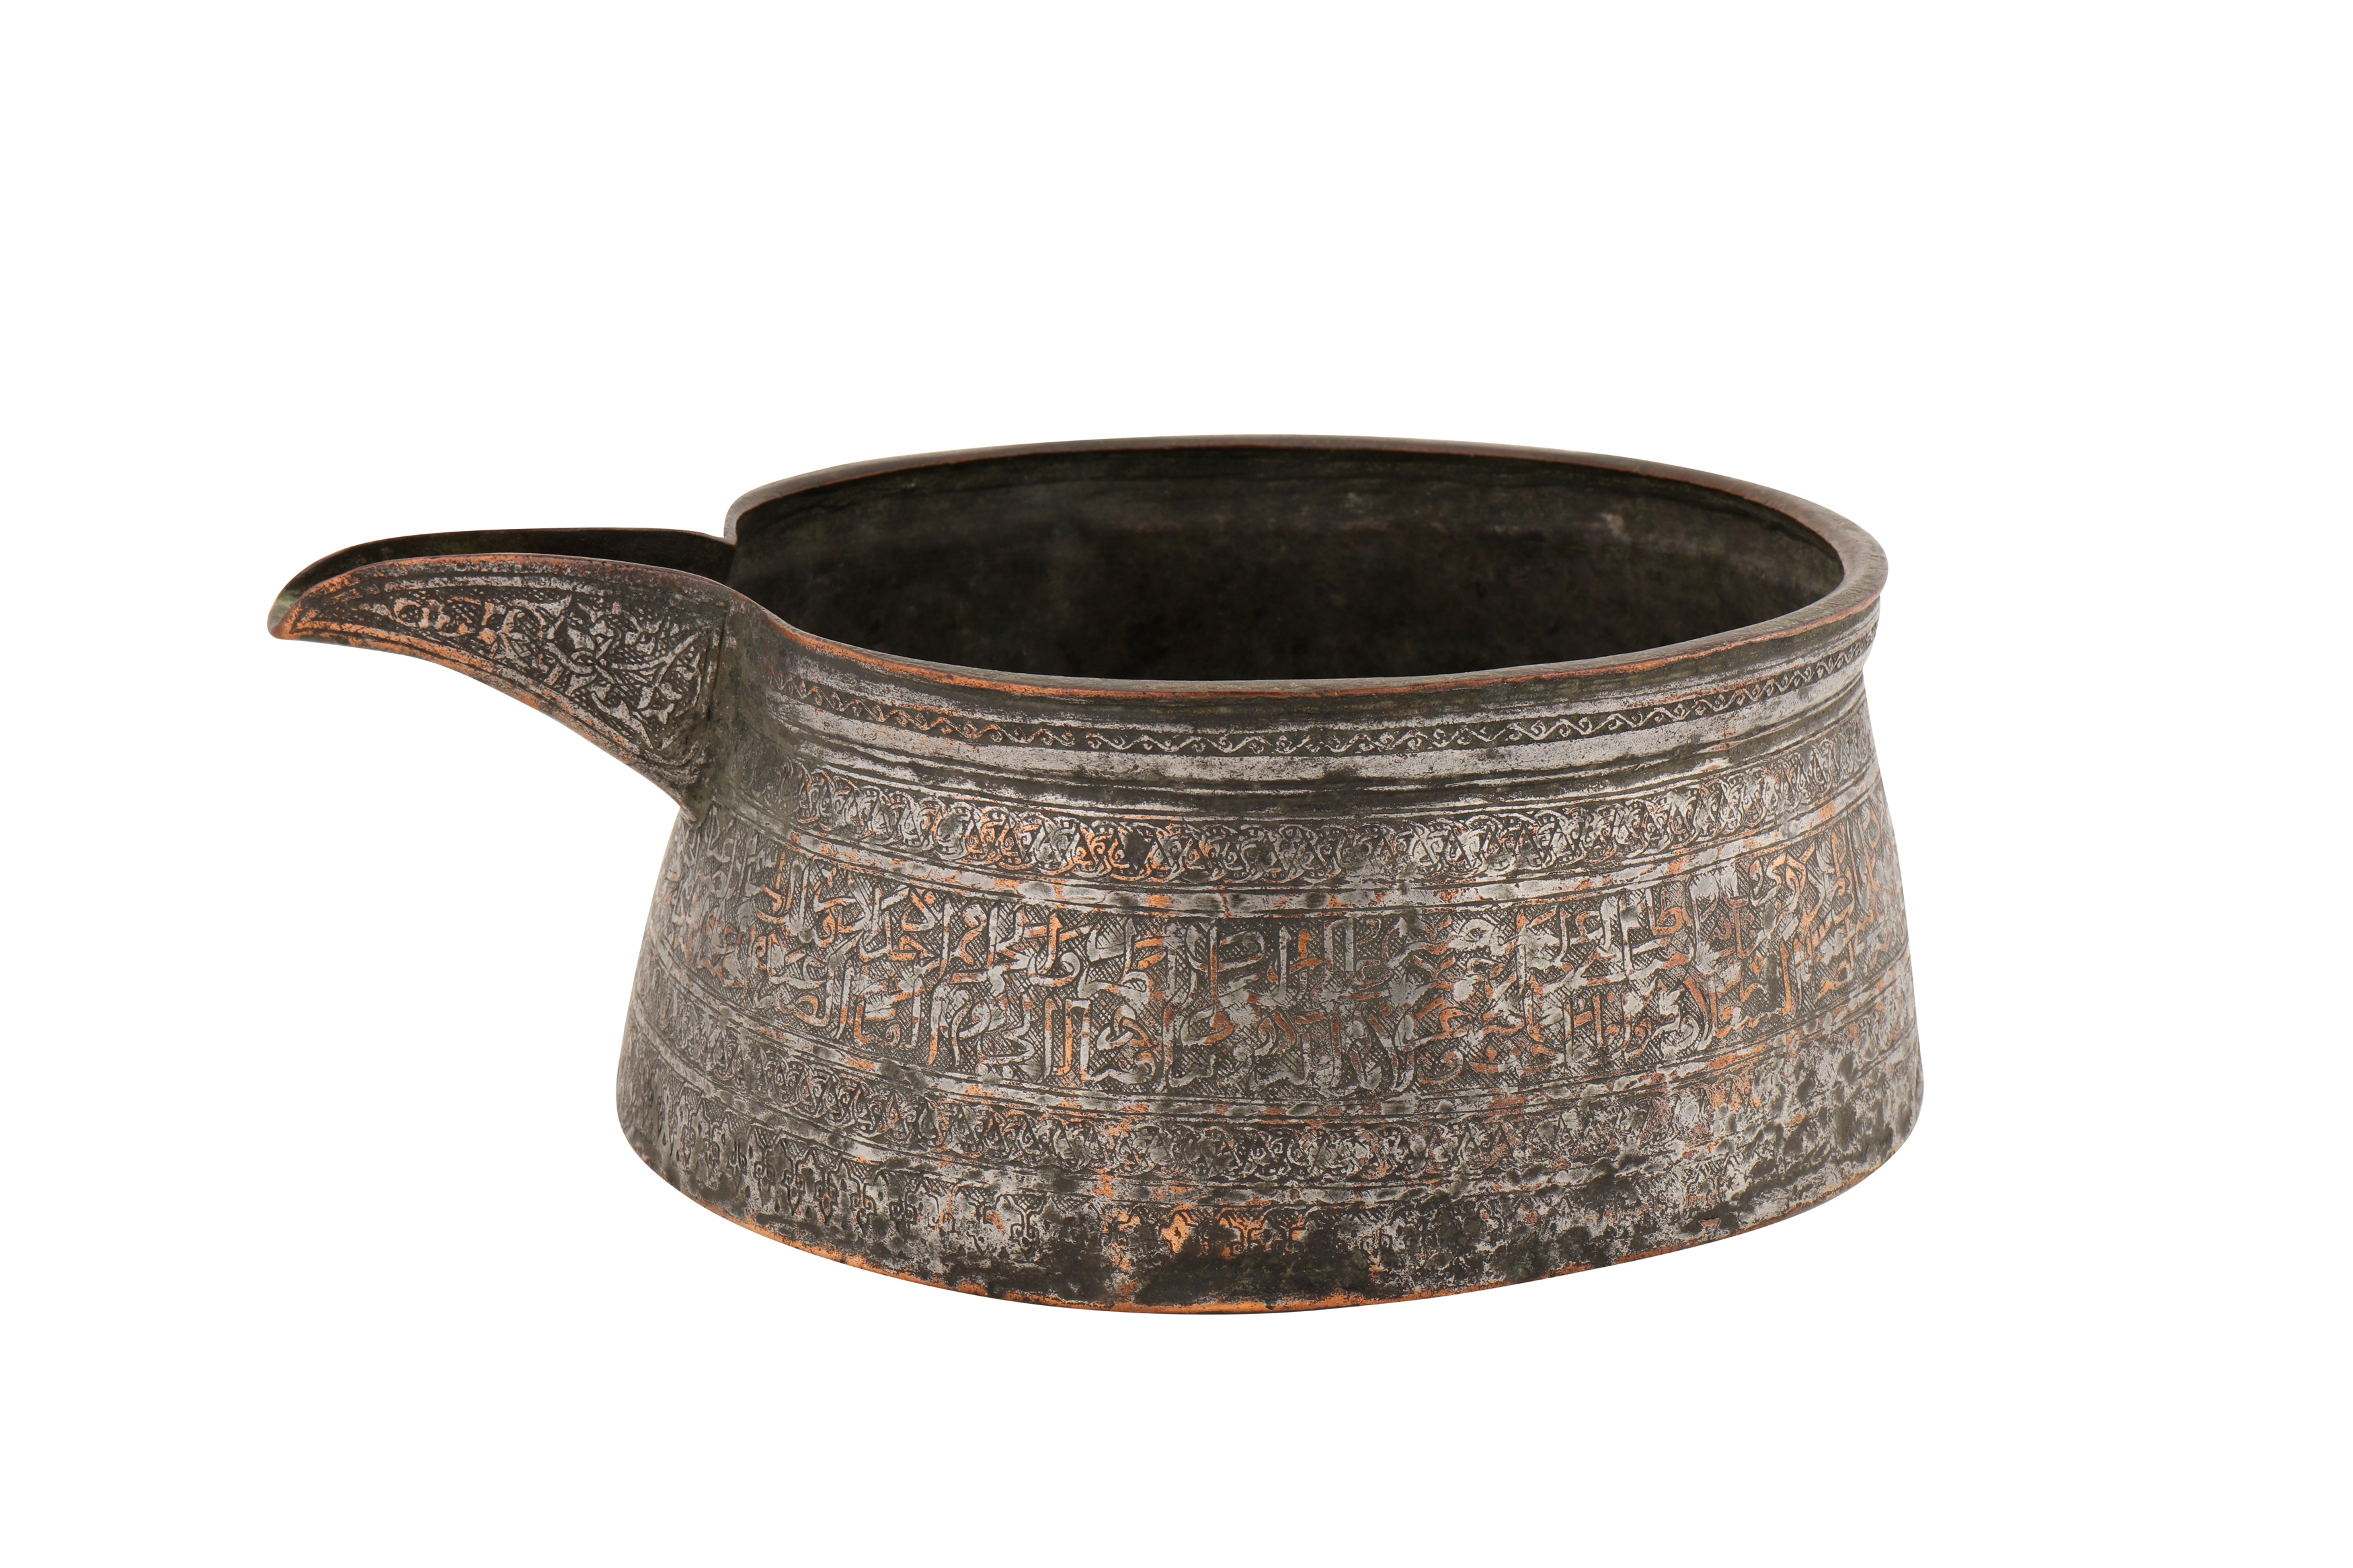 A 14TH-15TH CENTURY SYRIAN MAMLUK TINNED COPPER SPOUTED BOWL - Image 3 of 5